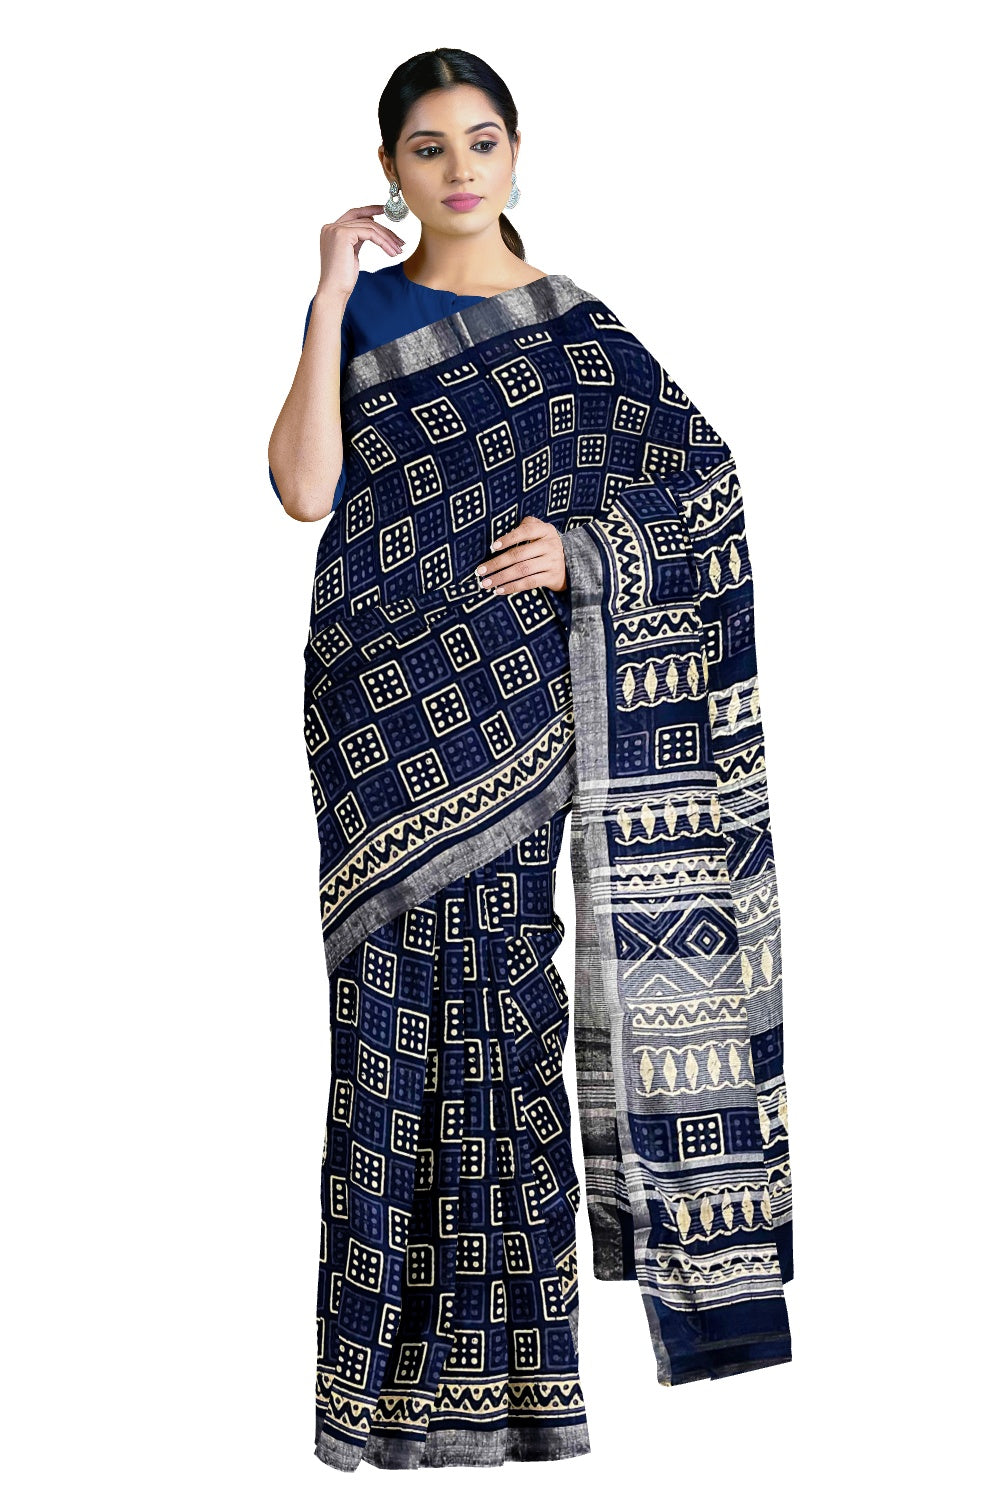 Southloom Linen Blue and White Designer Saree with Tassels